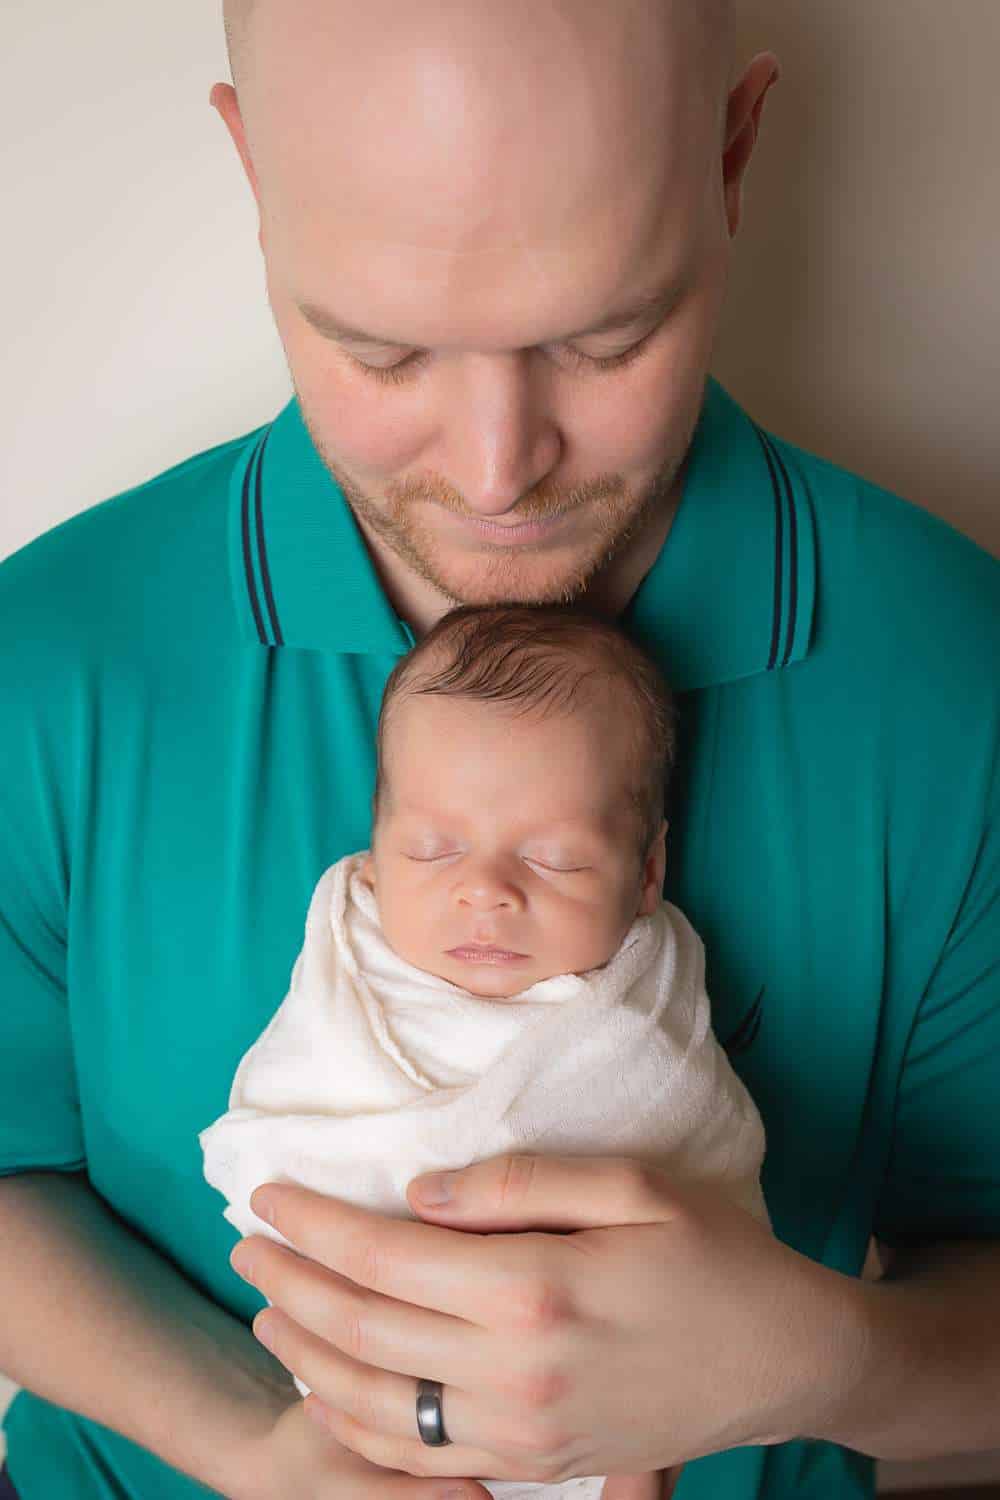 newborn photographer in rochester ny captures newborn baby boy asleep in his dad's arms